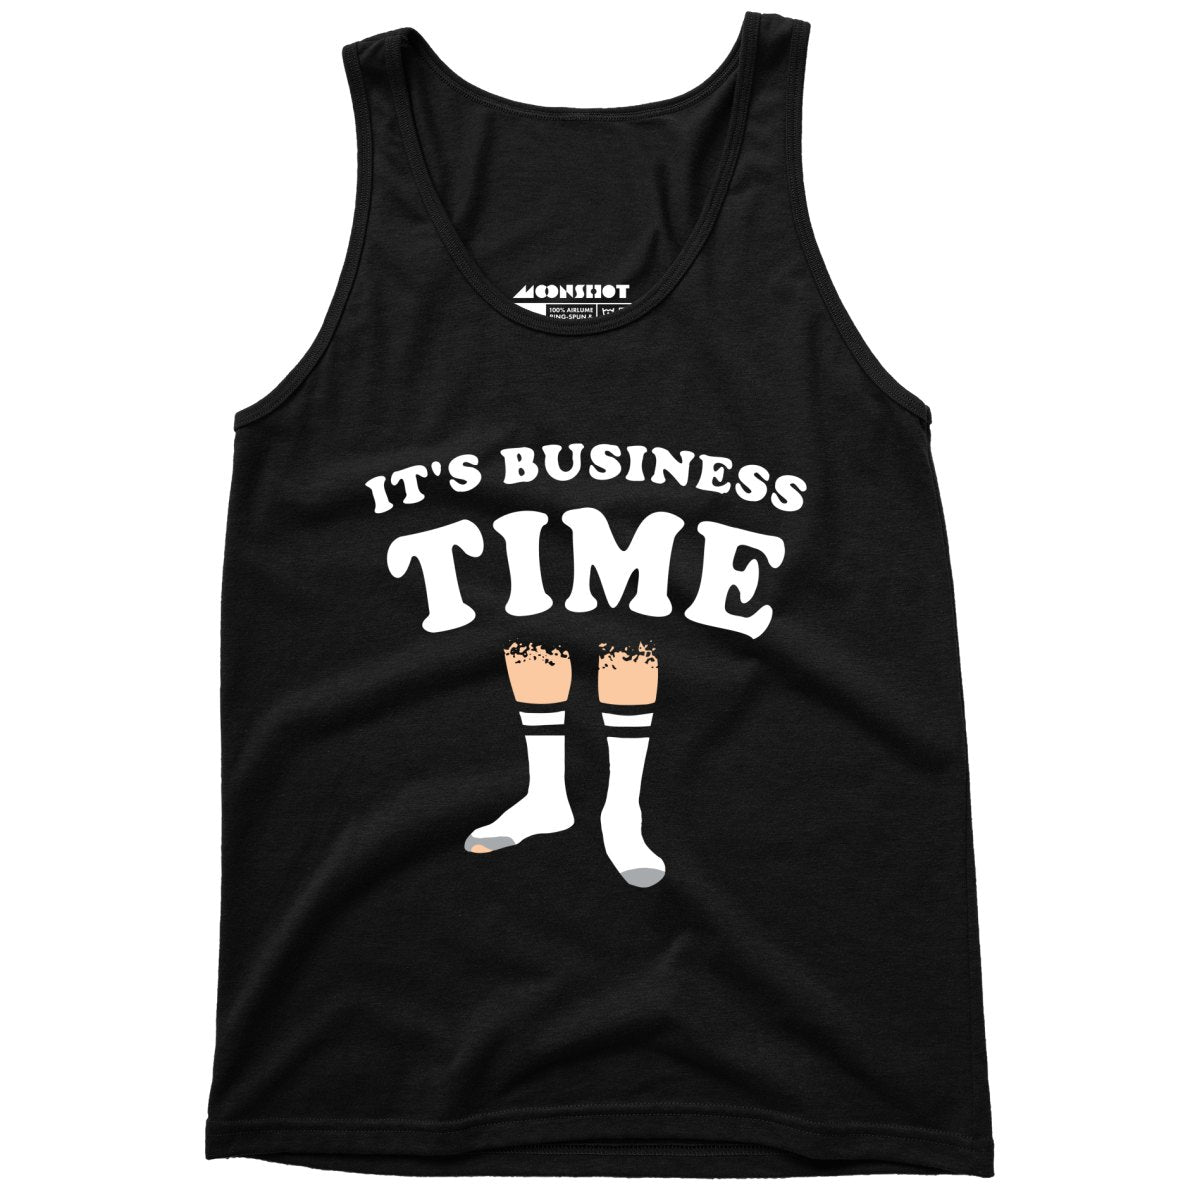 It's Business Time - Unisex Tank Top